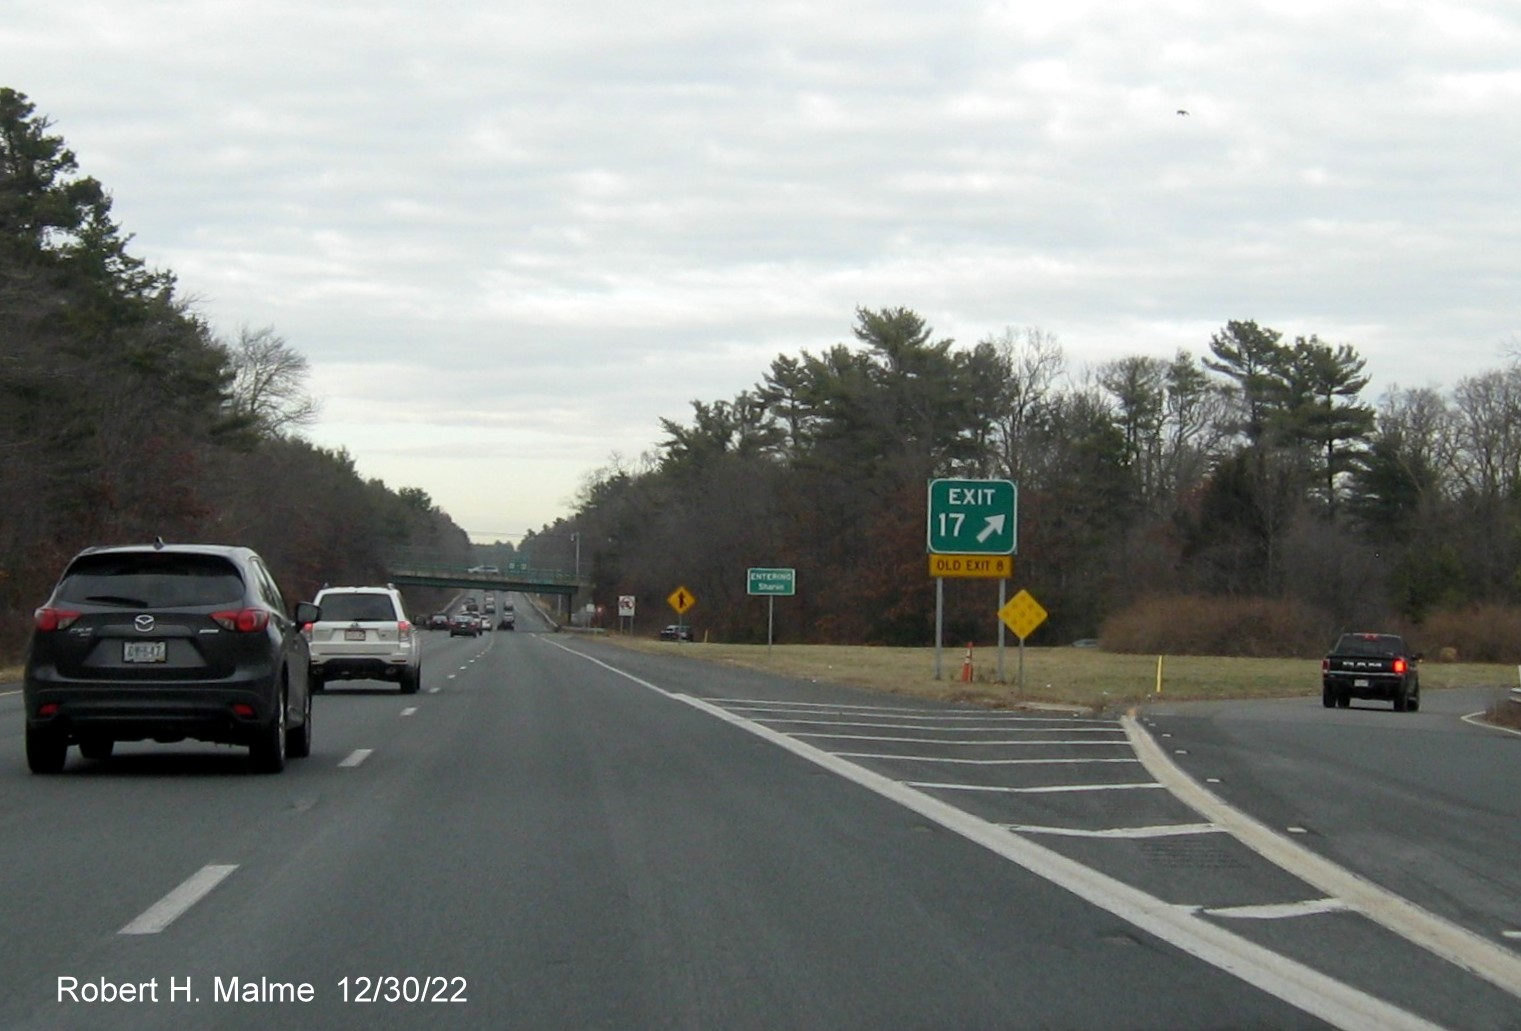 Image of new gore sign installed for South Main Street/Mechanic Street exit on I-95 North in Foxborough, December 2022